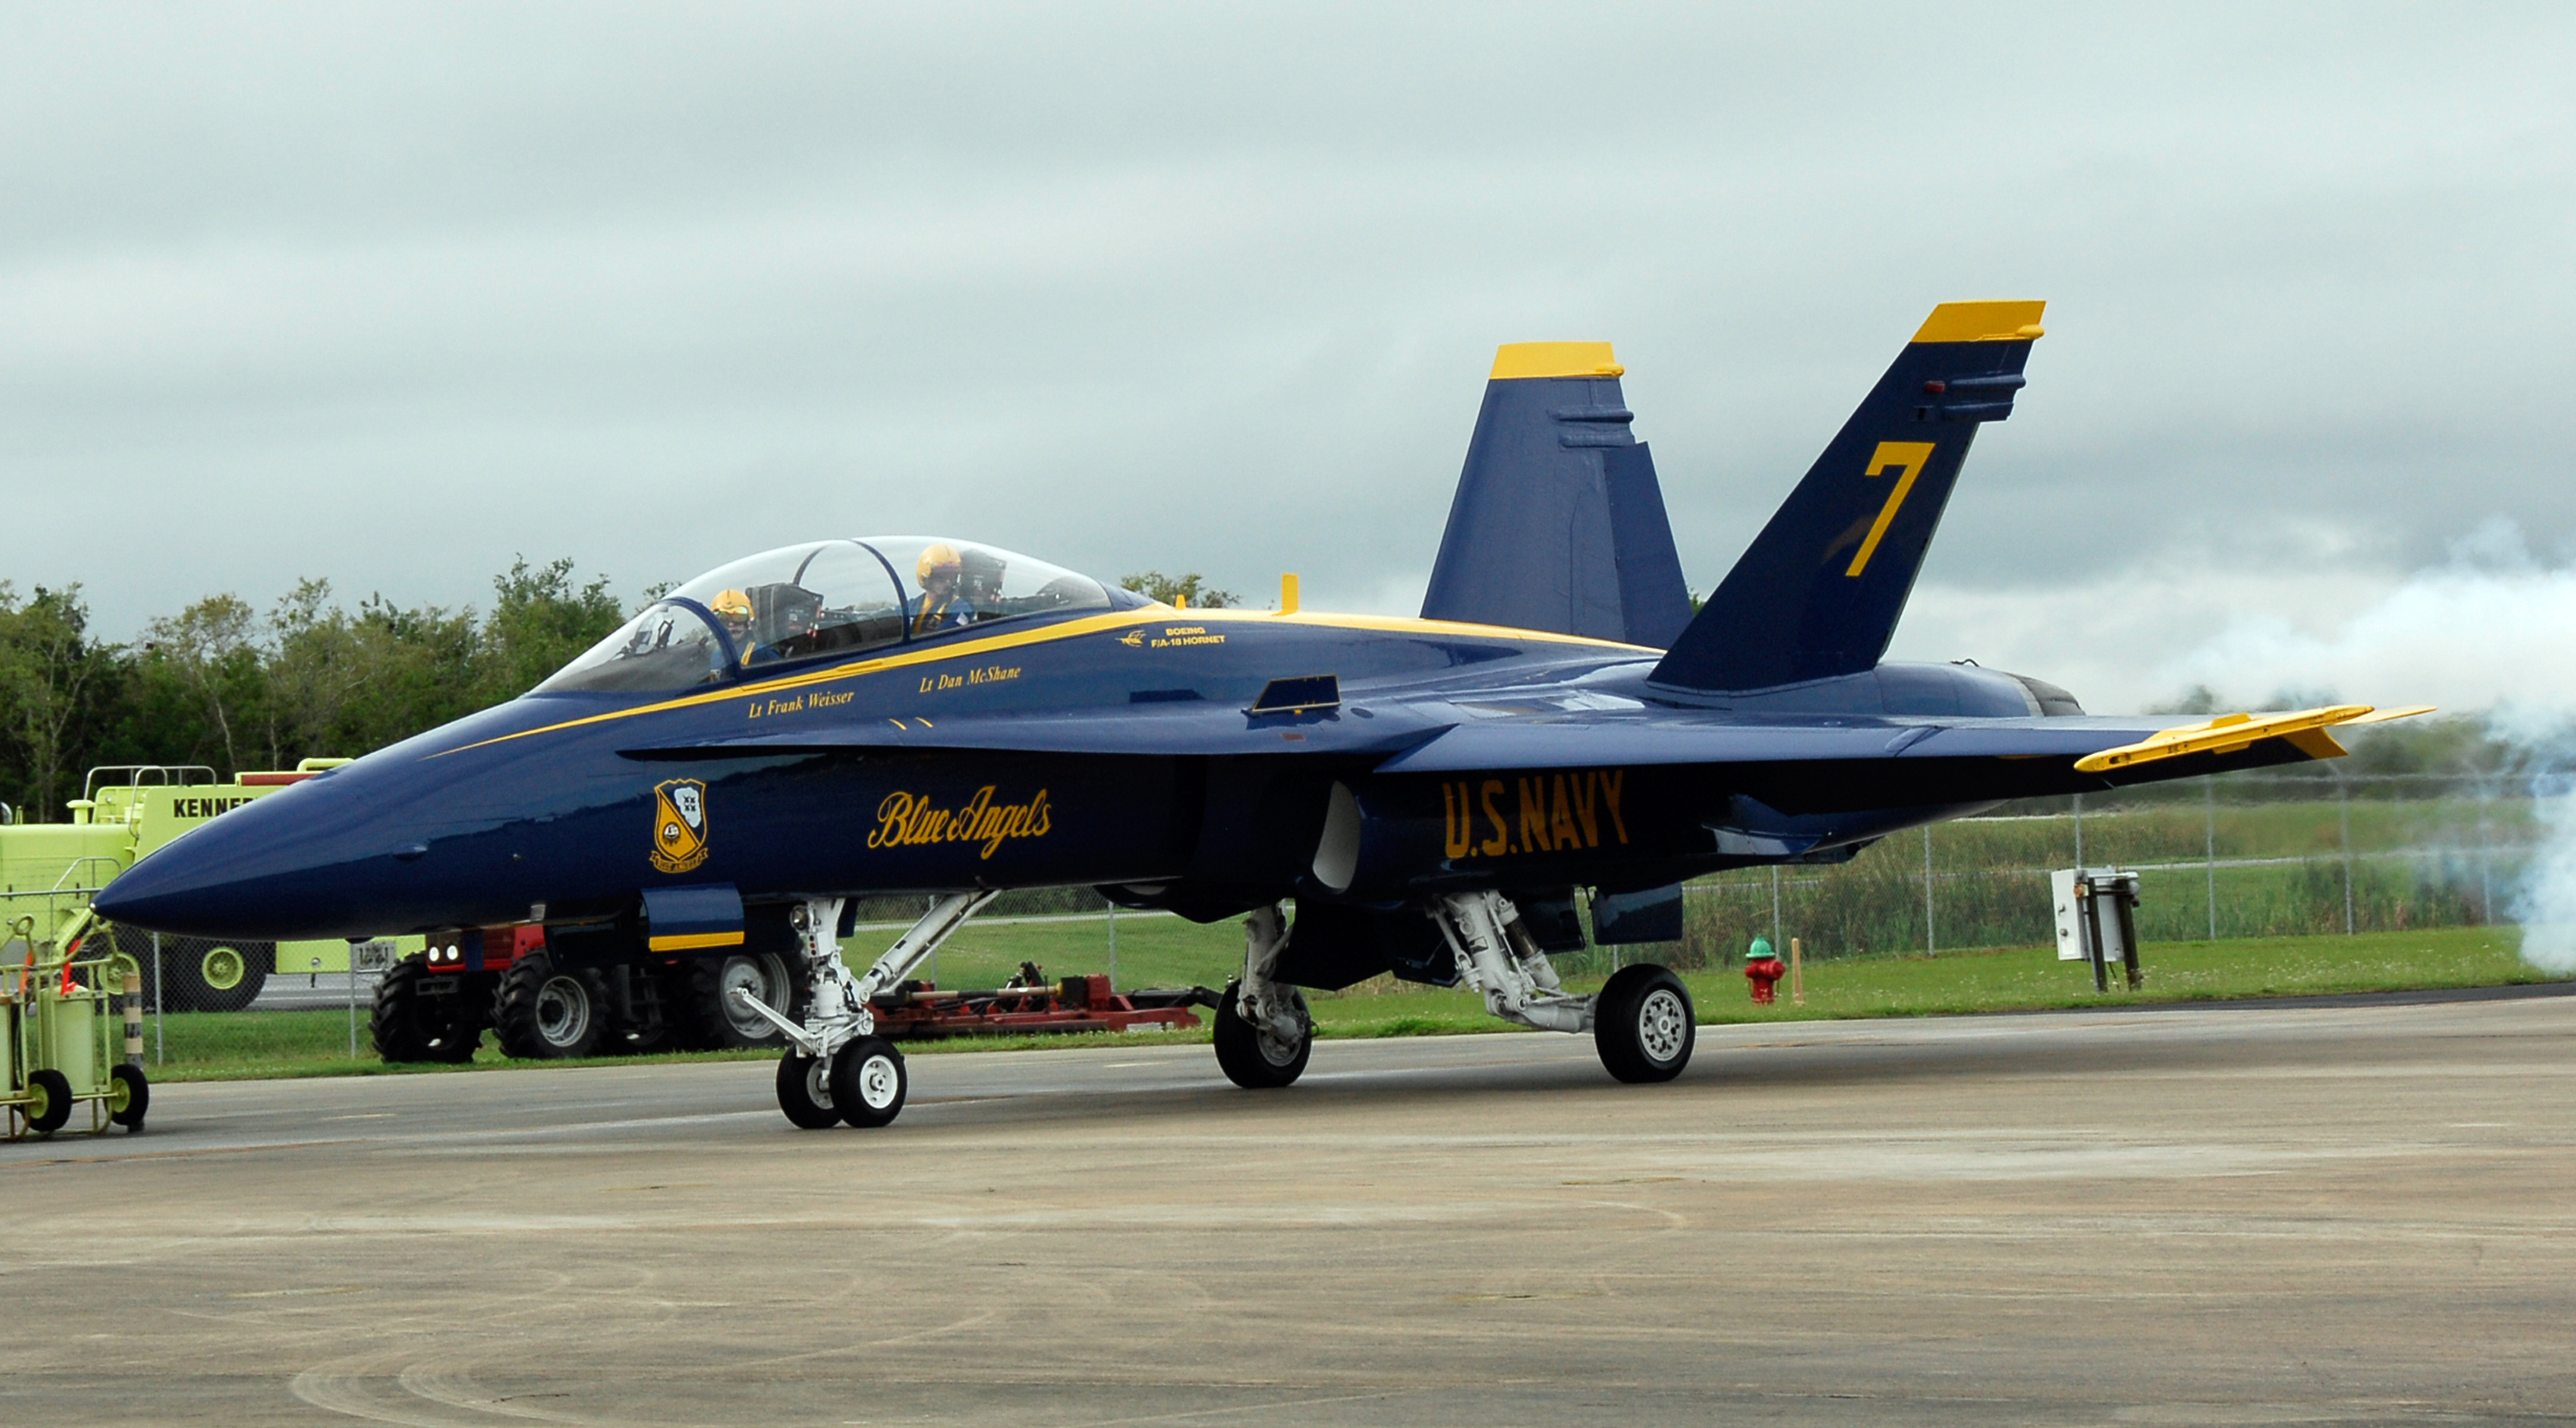 Blue Angel Two Seater | Blue Angel F-18 two seater giving 